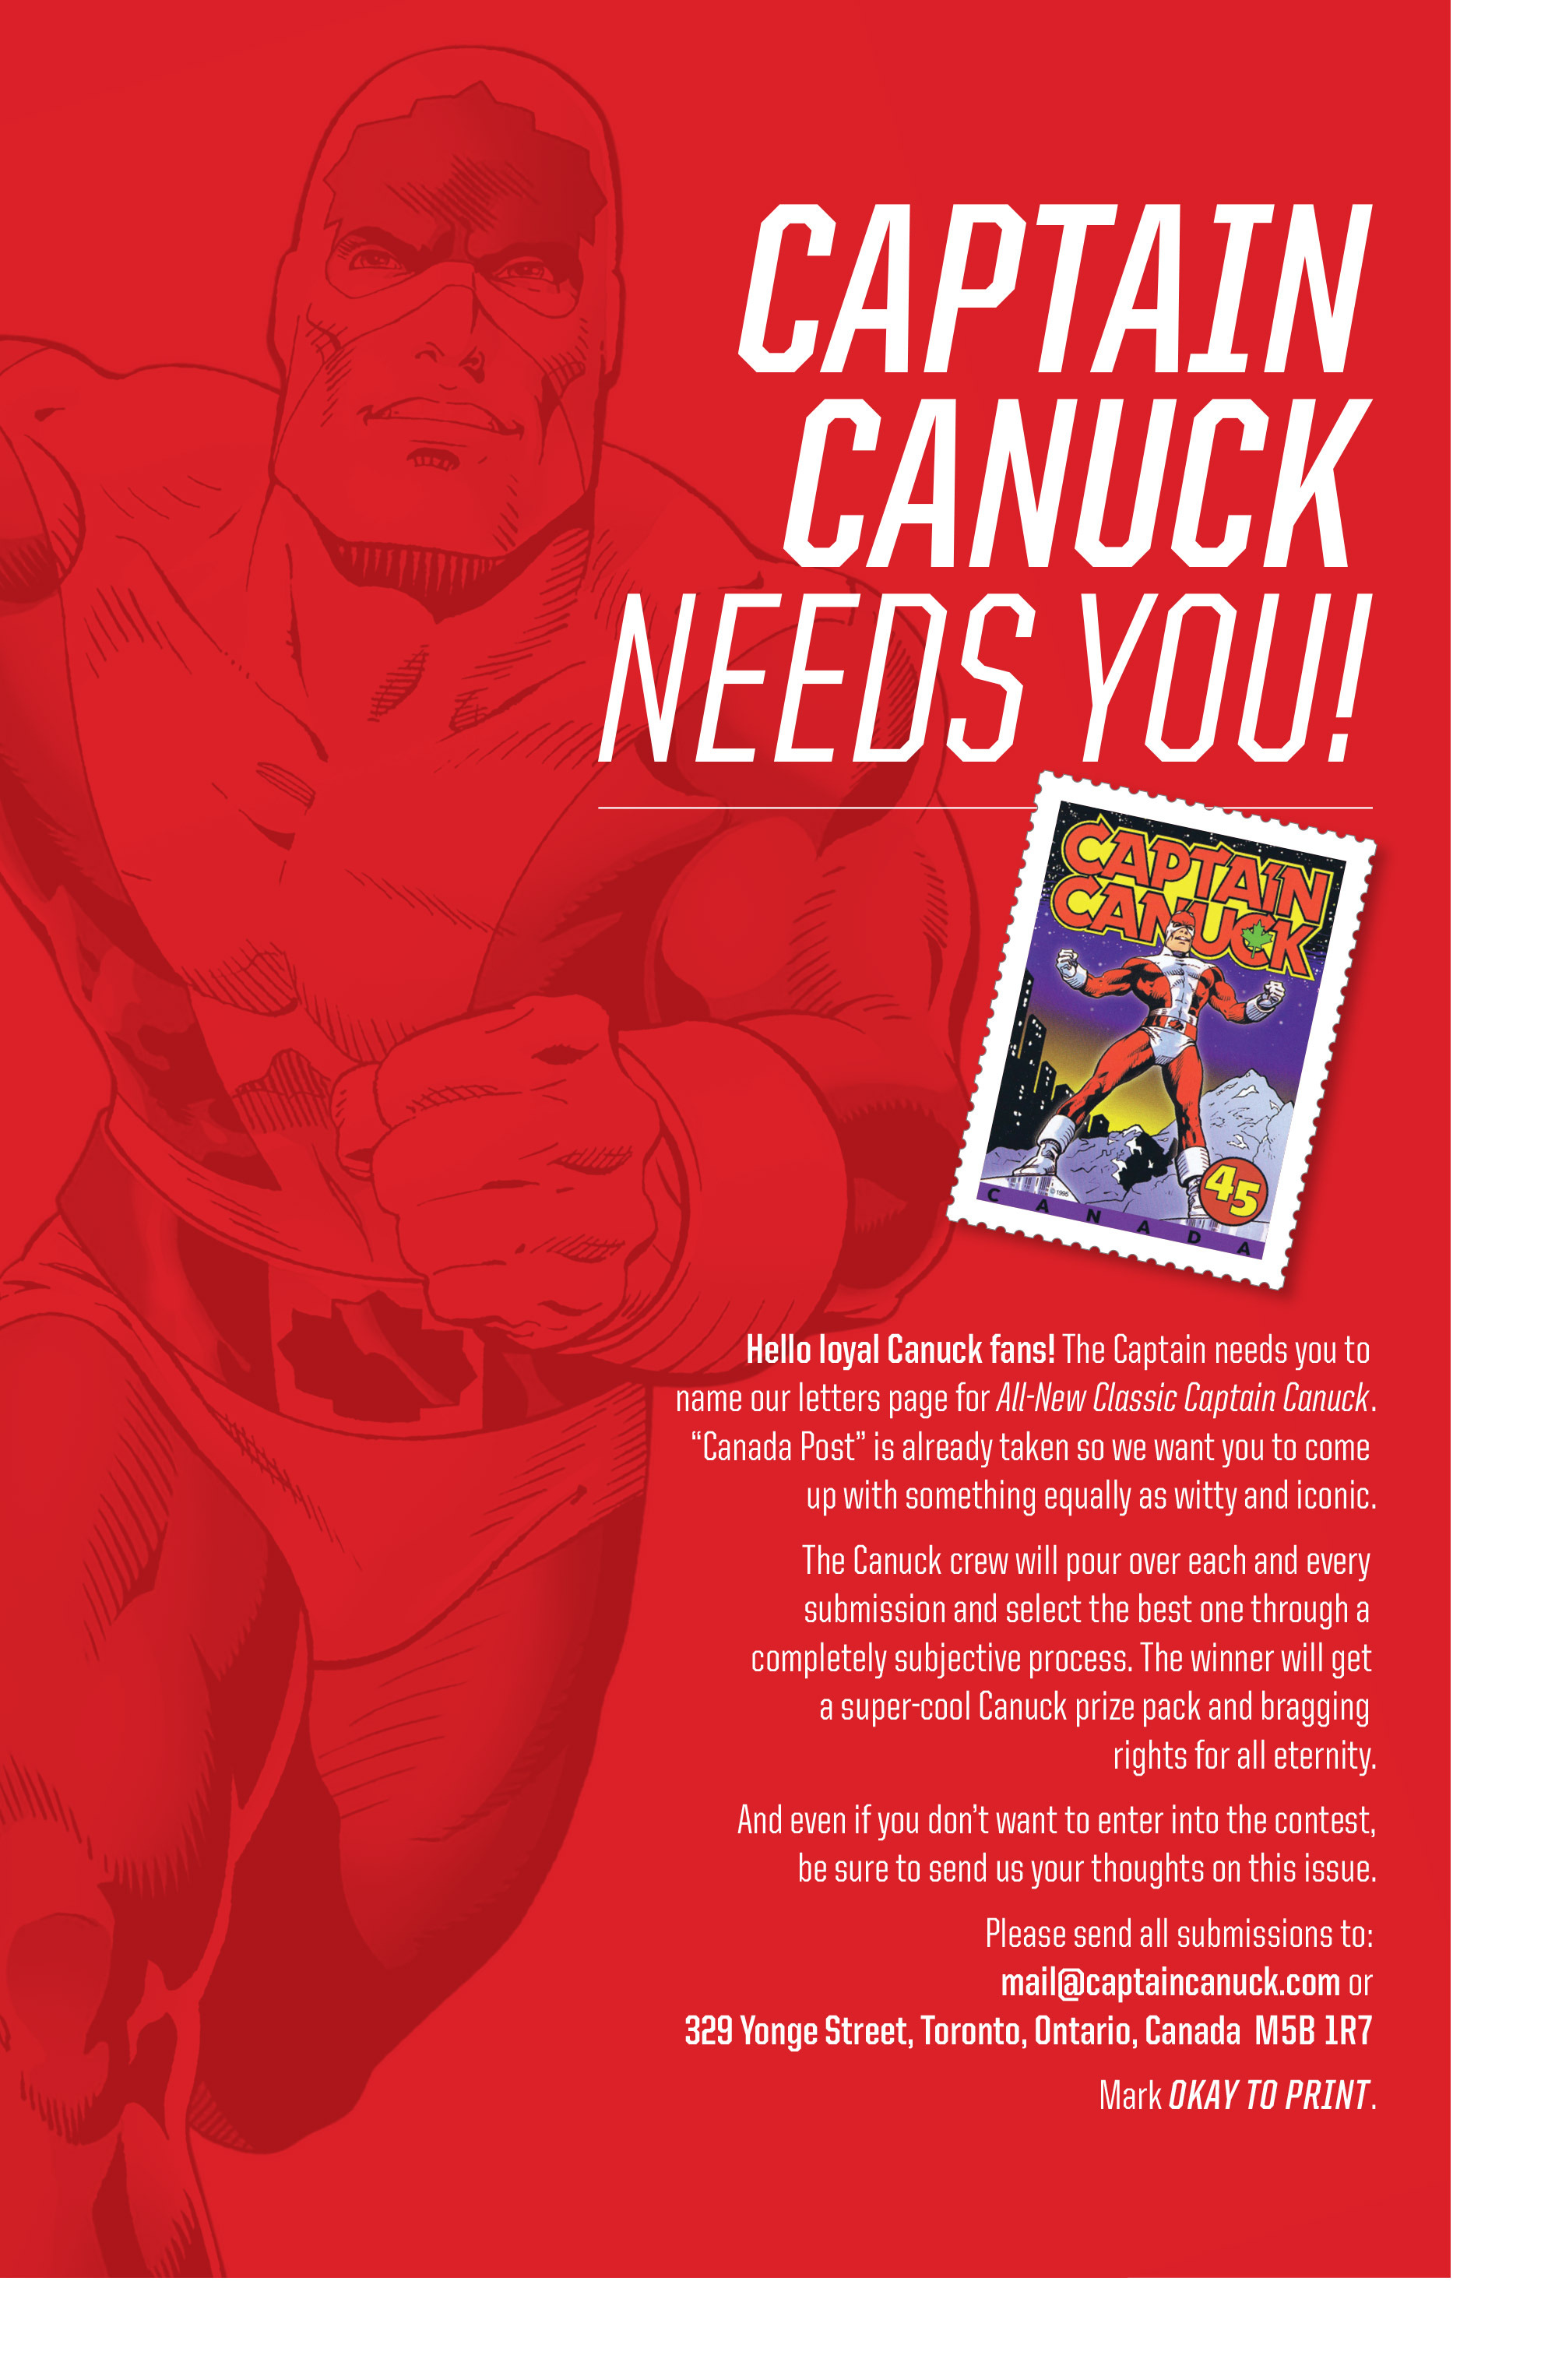 Read online All-New Classic Captain Canuck comic -  Issue #0 - 51